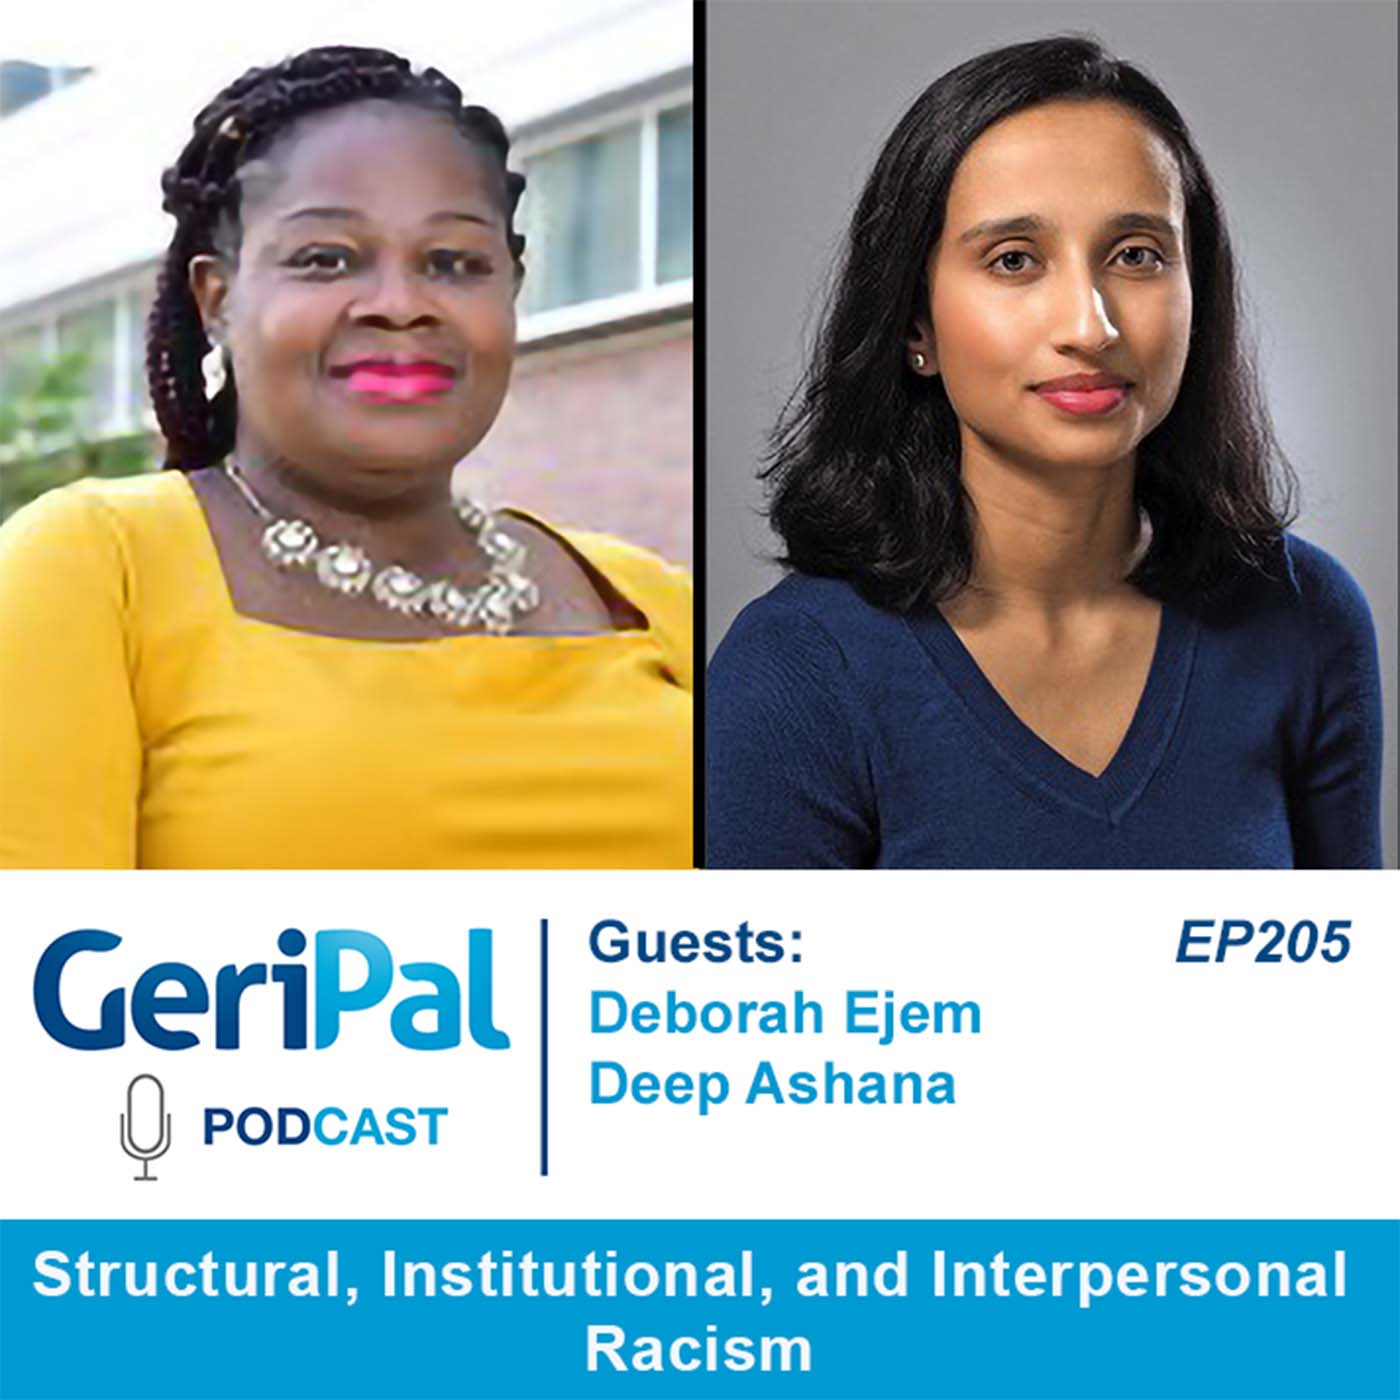 Structural, Institutional, and Interpersonal Racism: Podcast with Deborah Ejem and Deep Ashana